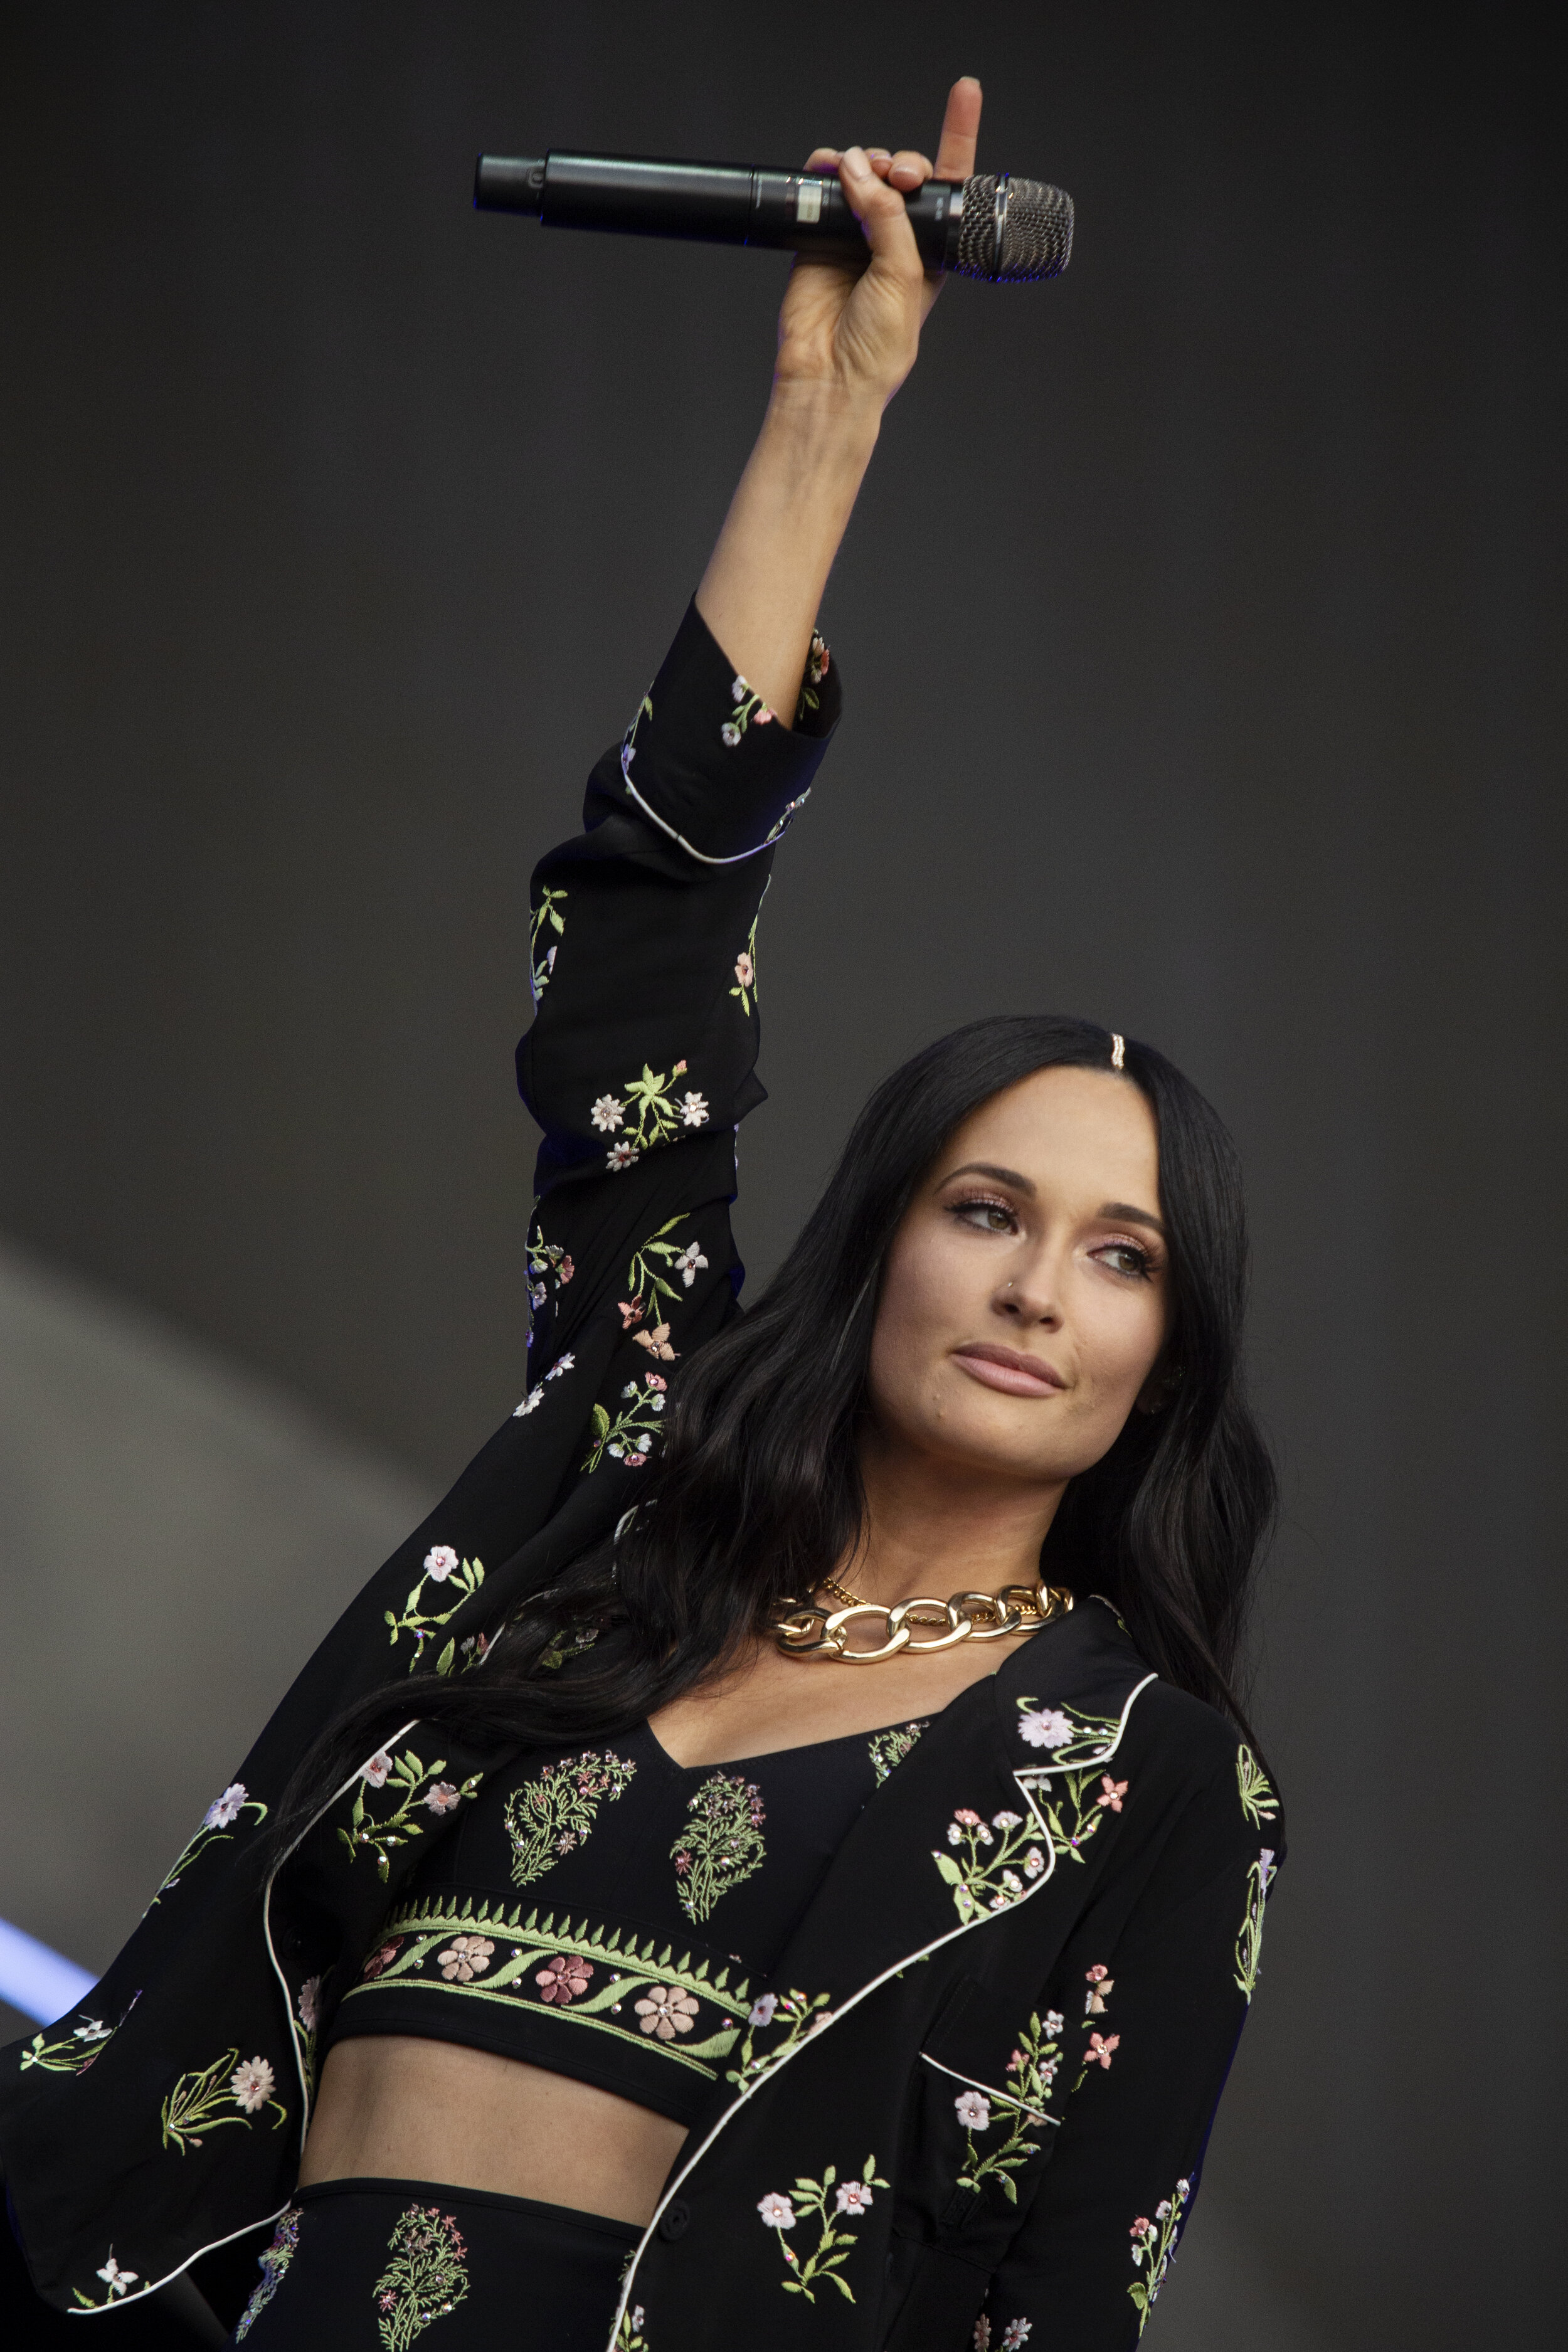  AUSTIN, TX. Kacey Musgraves performs at ACL Music Festival 2019. 